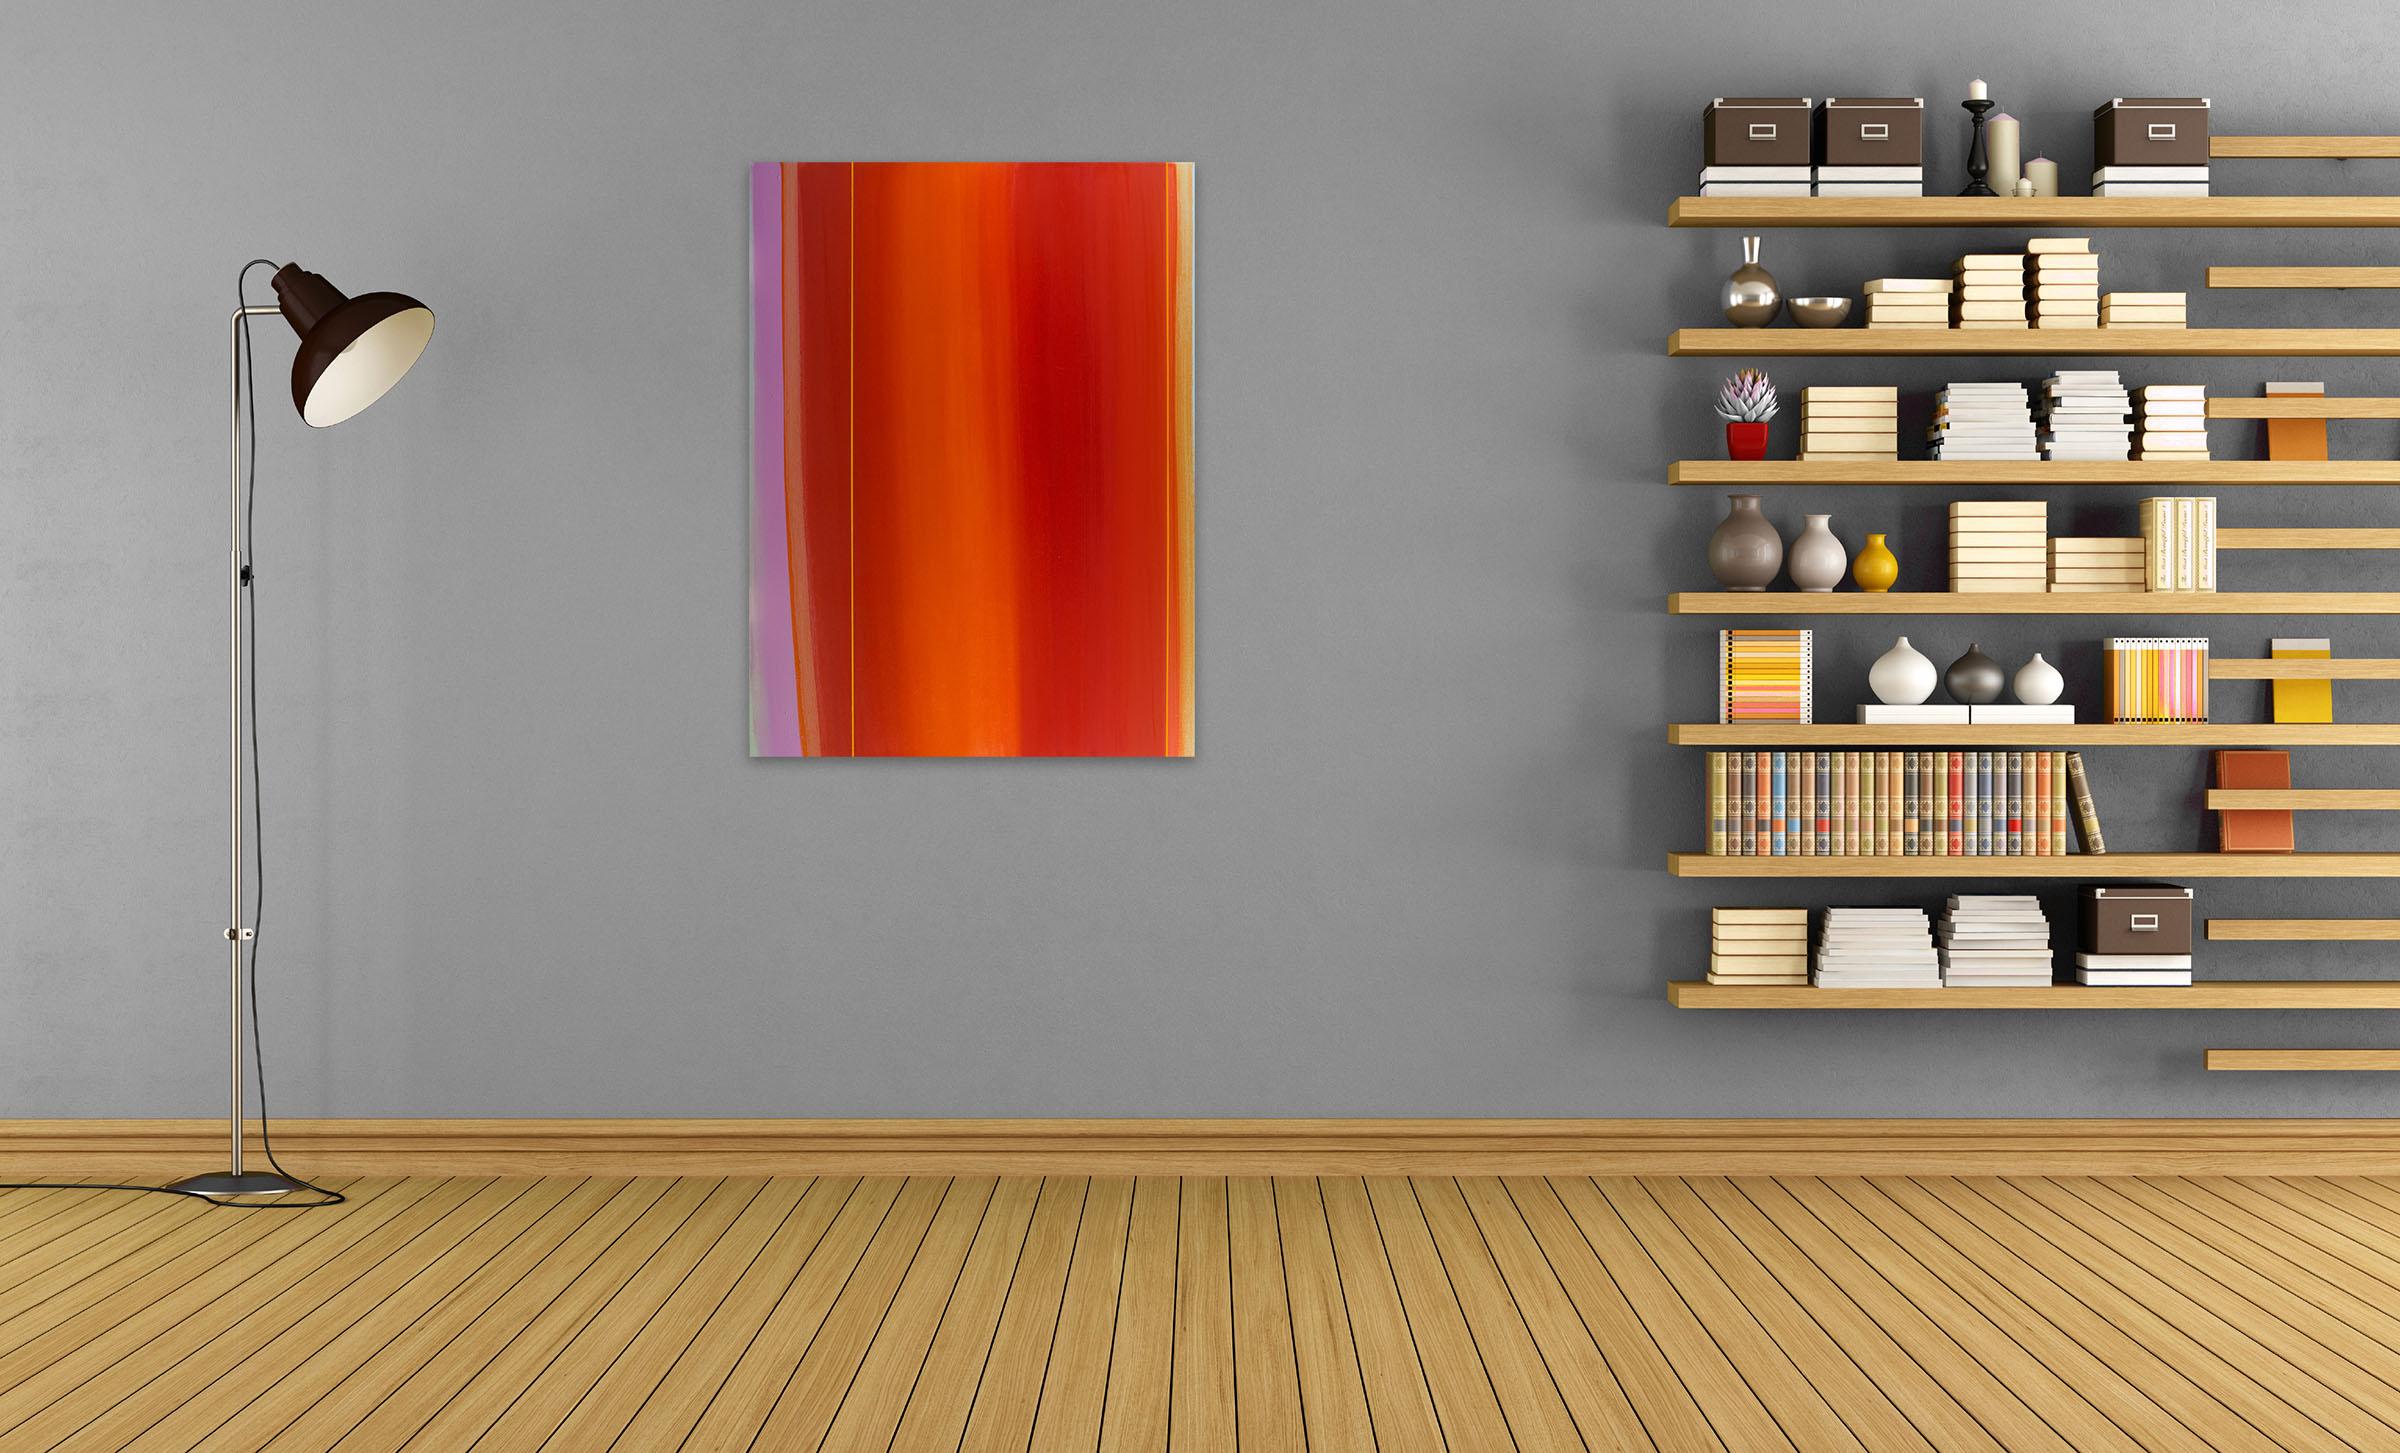 Flare (Abstract painting) - Painting by Matthew Langley